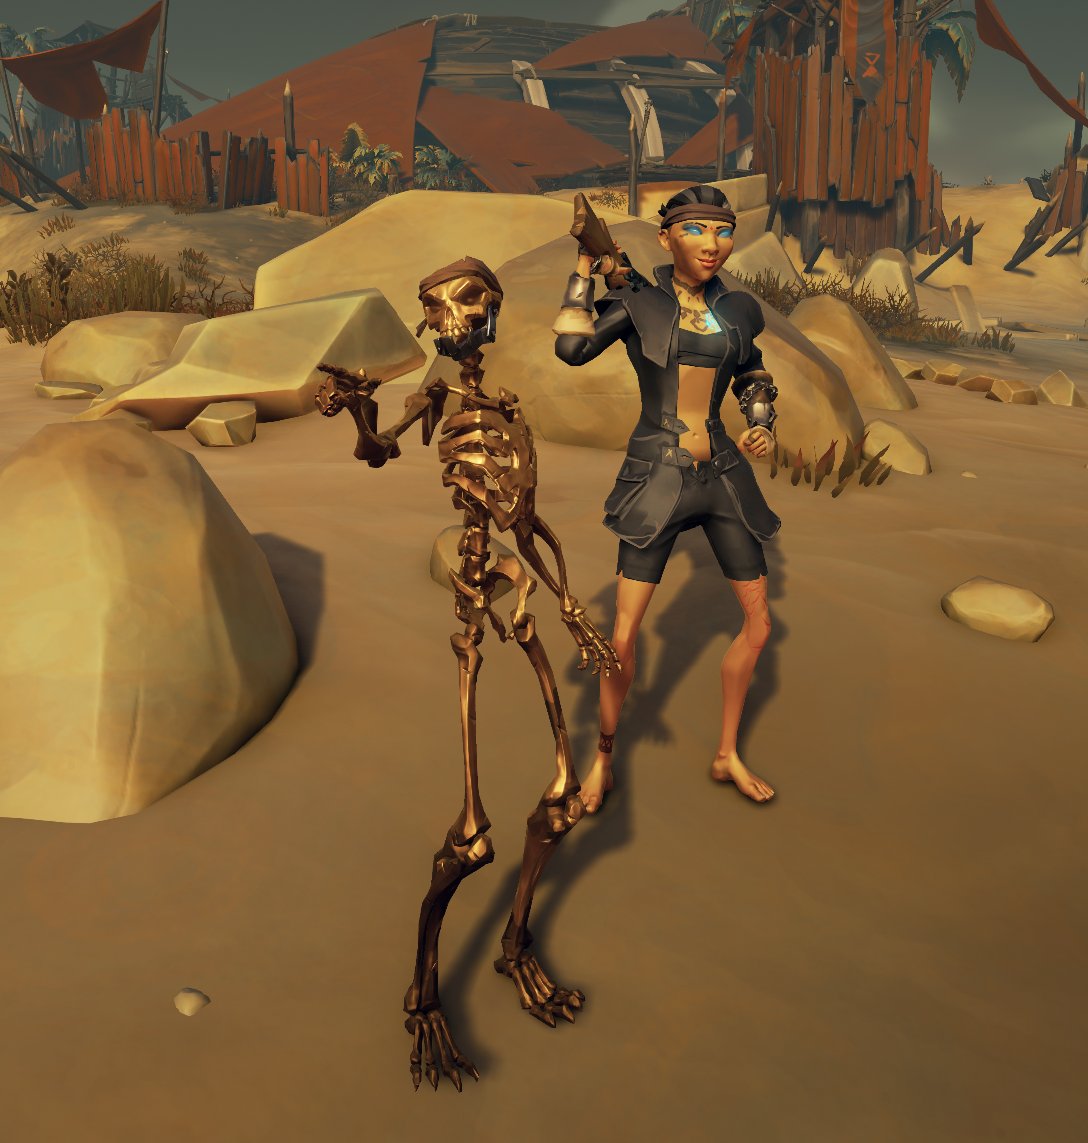 after a long very painful and awesome times WE FINALLY DID IT GOLD SKELLY CURSE @SeaOfThieves #BeMorePirate 1000 BABY!